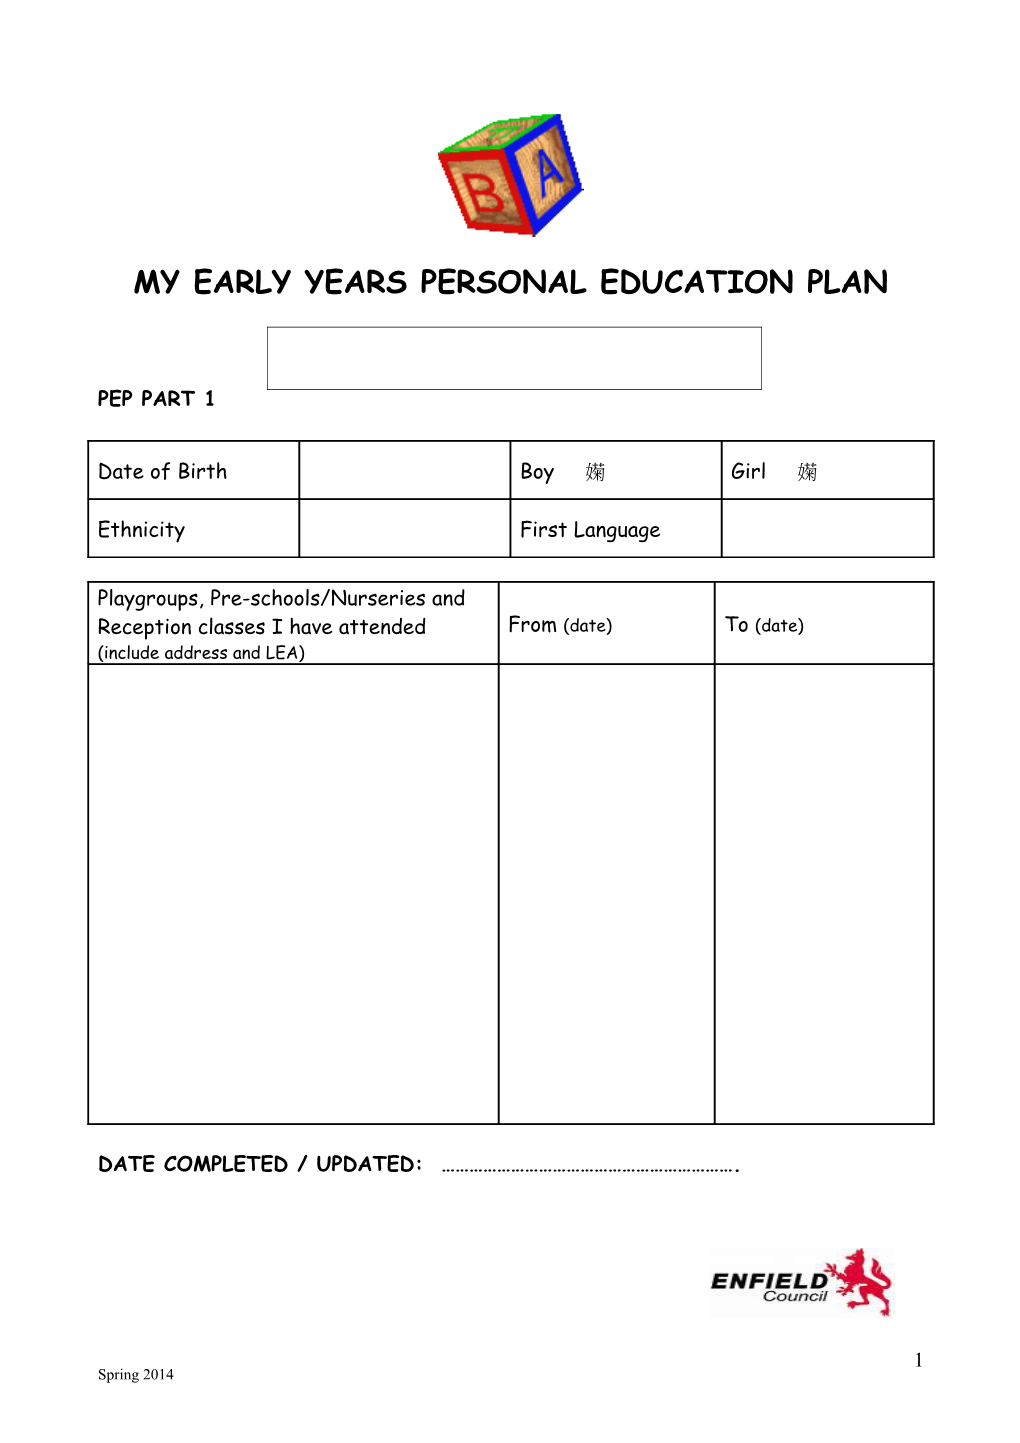 My Early Years Personal Education Plan